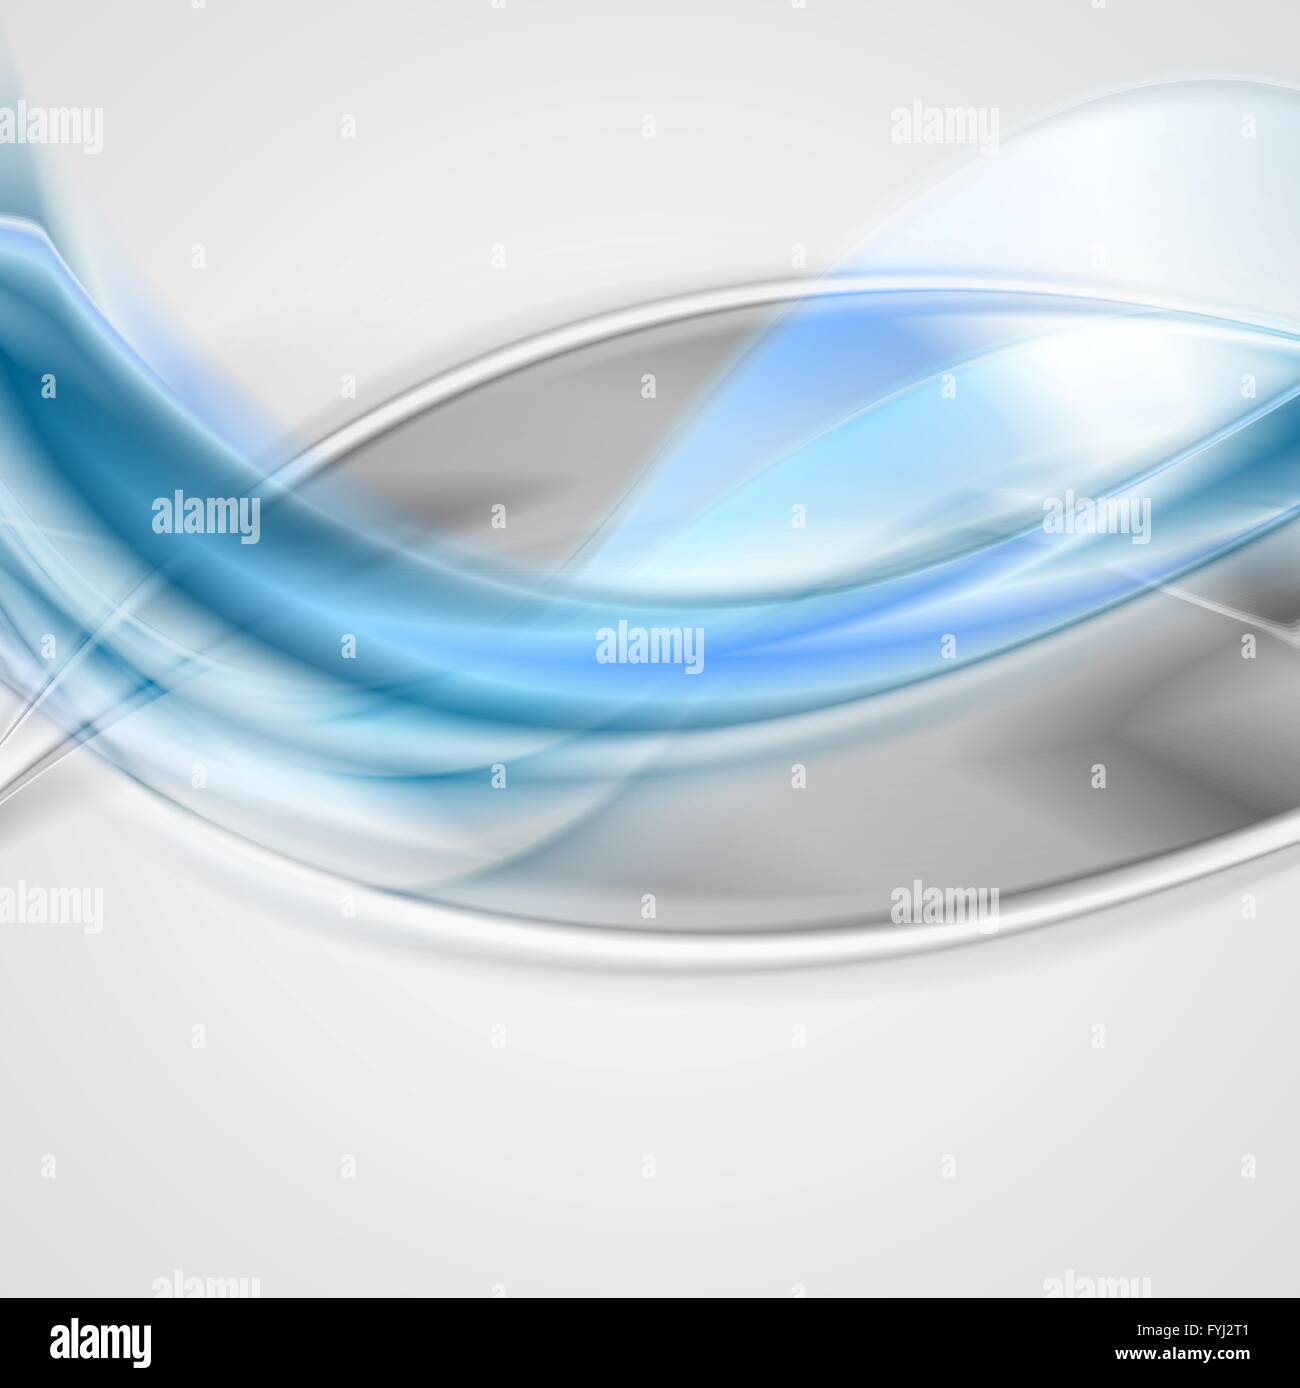 Bright waves background. Gradient mesh and blend i Stock Photo